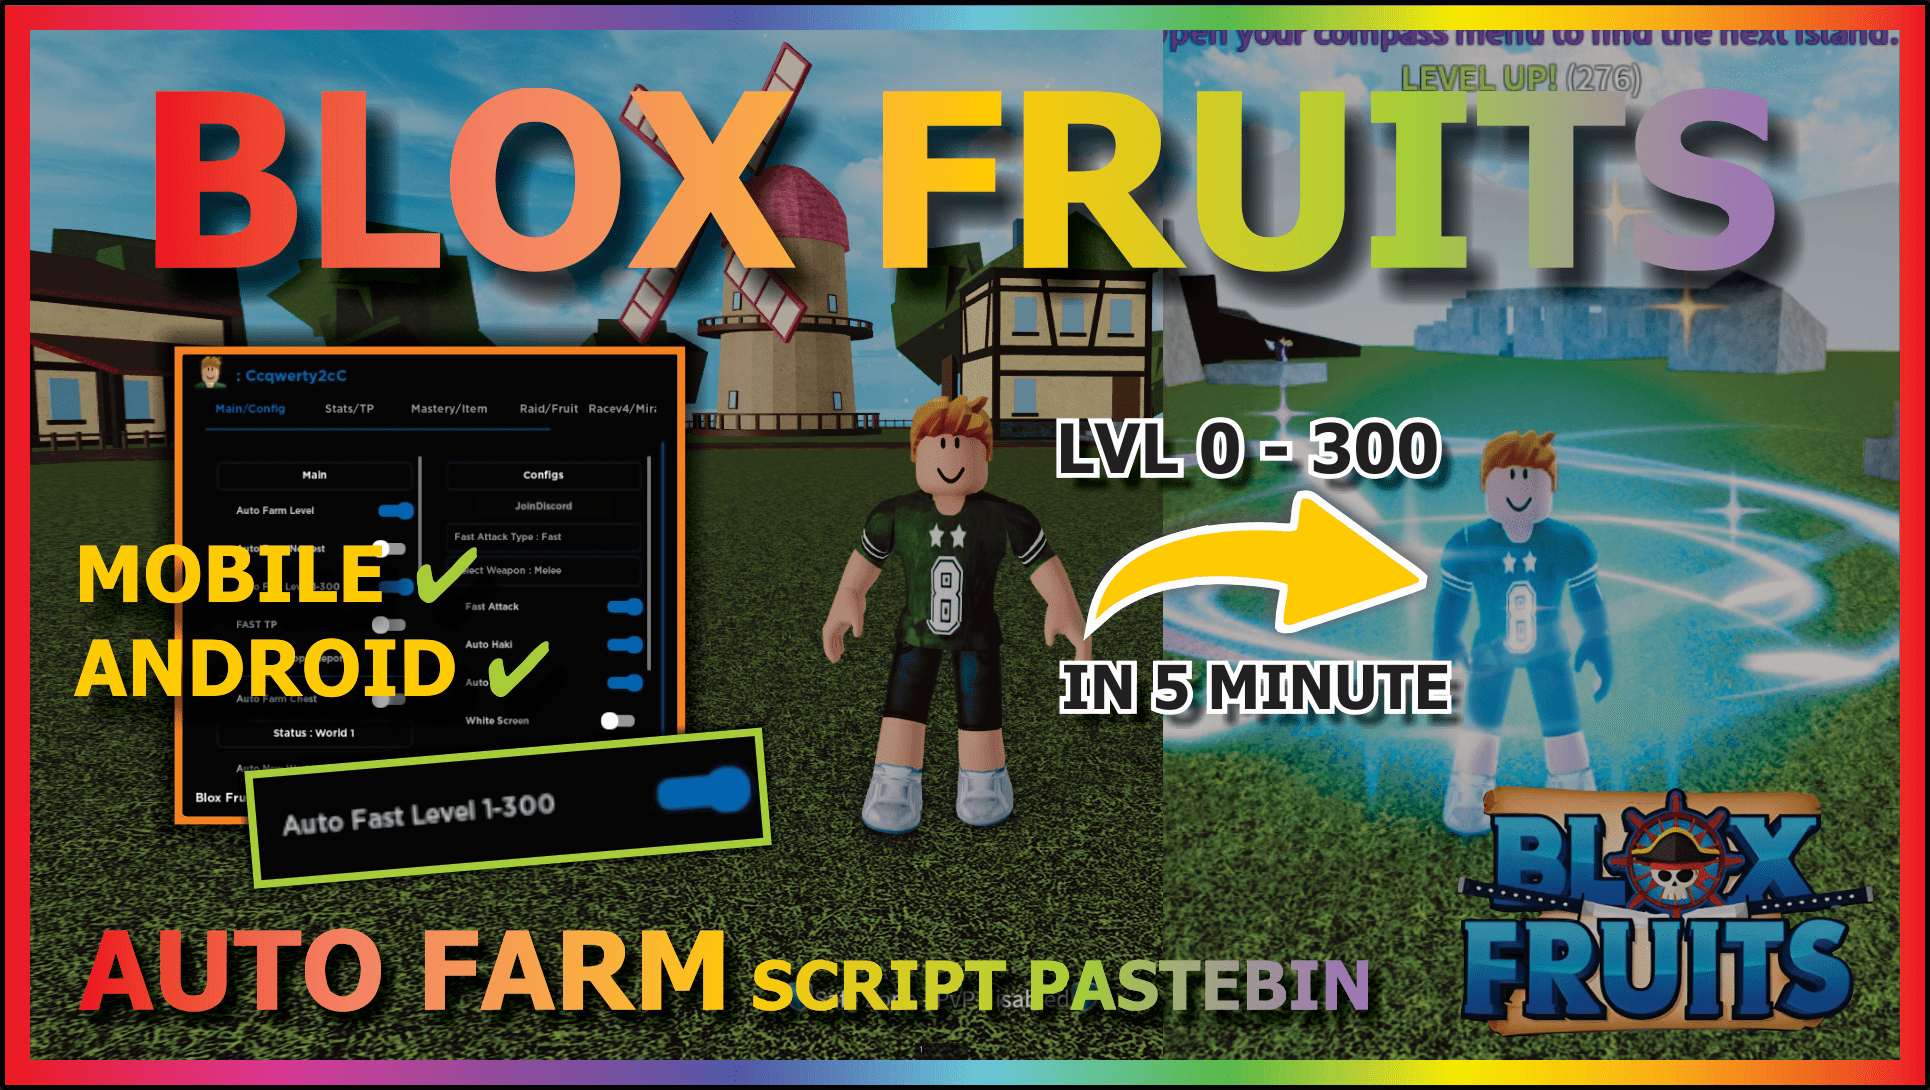 You are currently viewing BLOX FRUITS (LVL 0 – 300 IN 5 MINUTE)